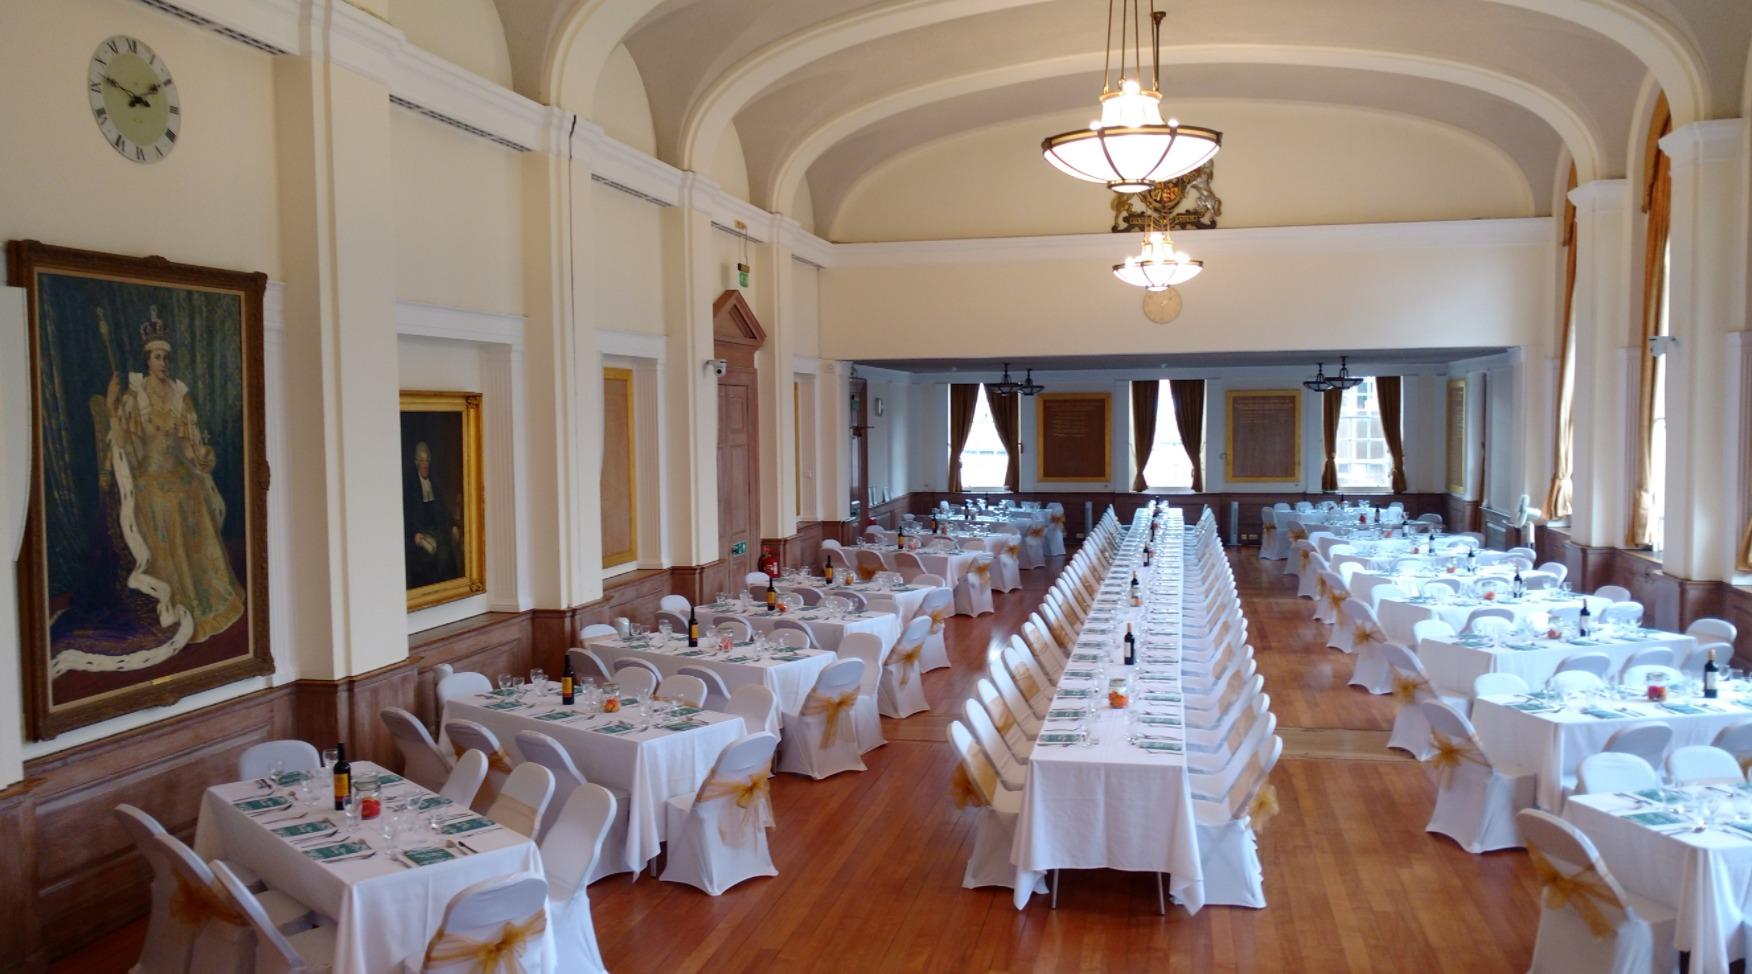 Queen Anne Suite, The Guildhall Venue photo #1